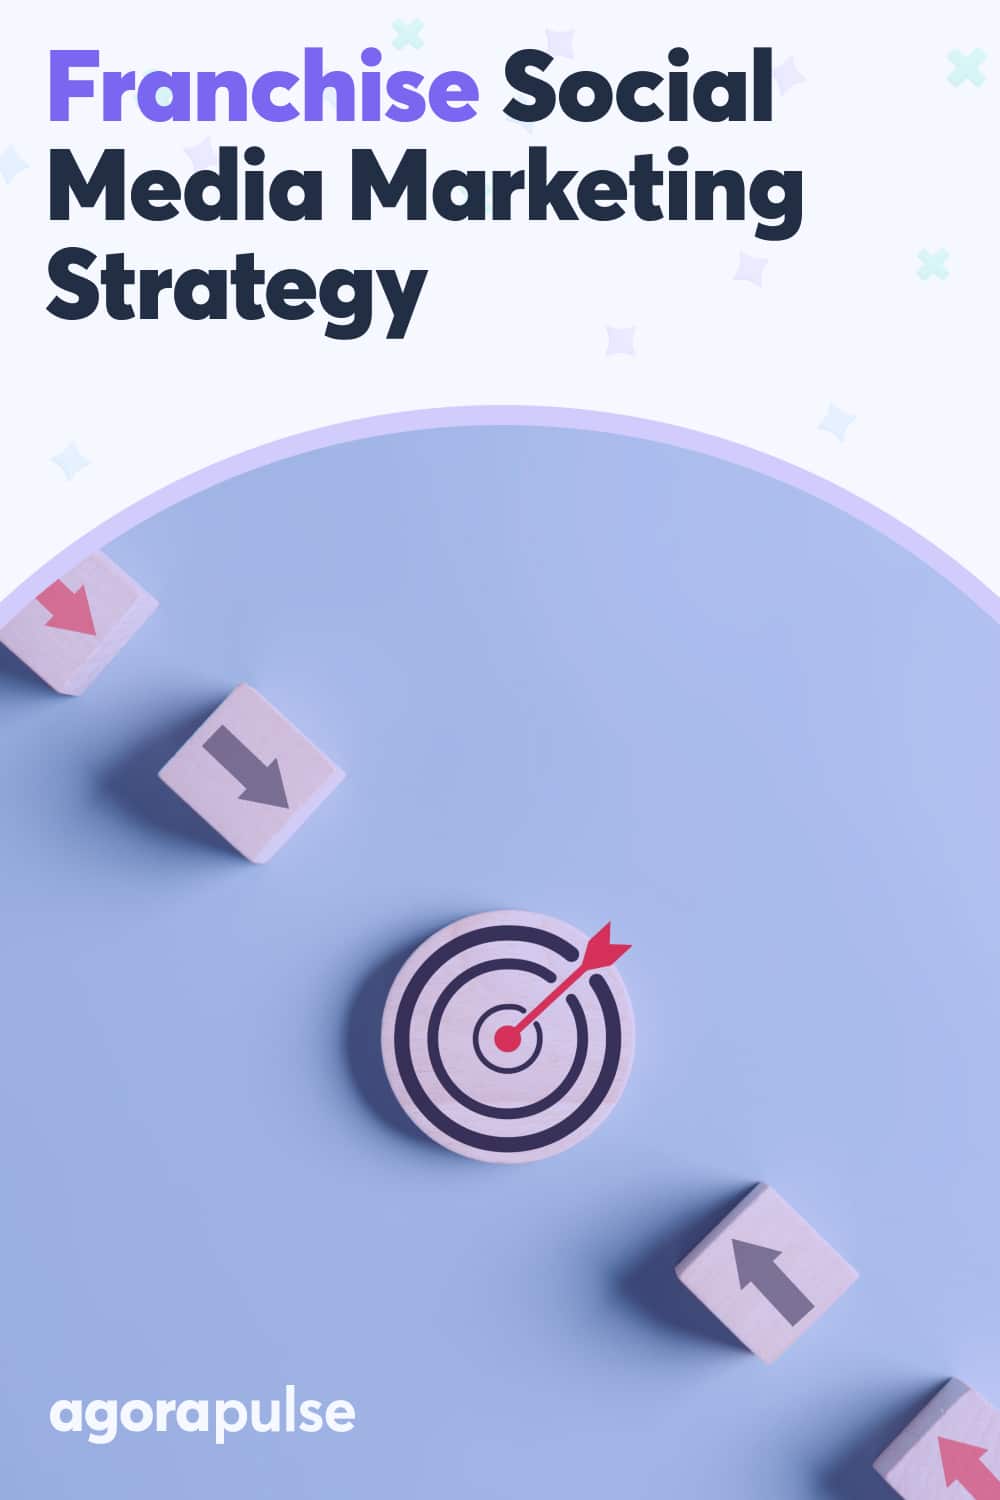 Franchise Social Media Marketing: How to Choose Between the Right Strategy